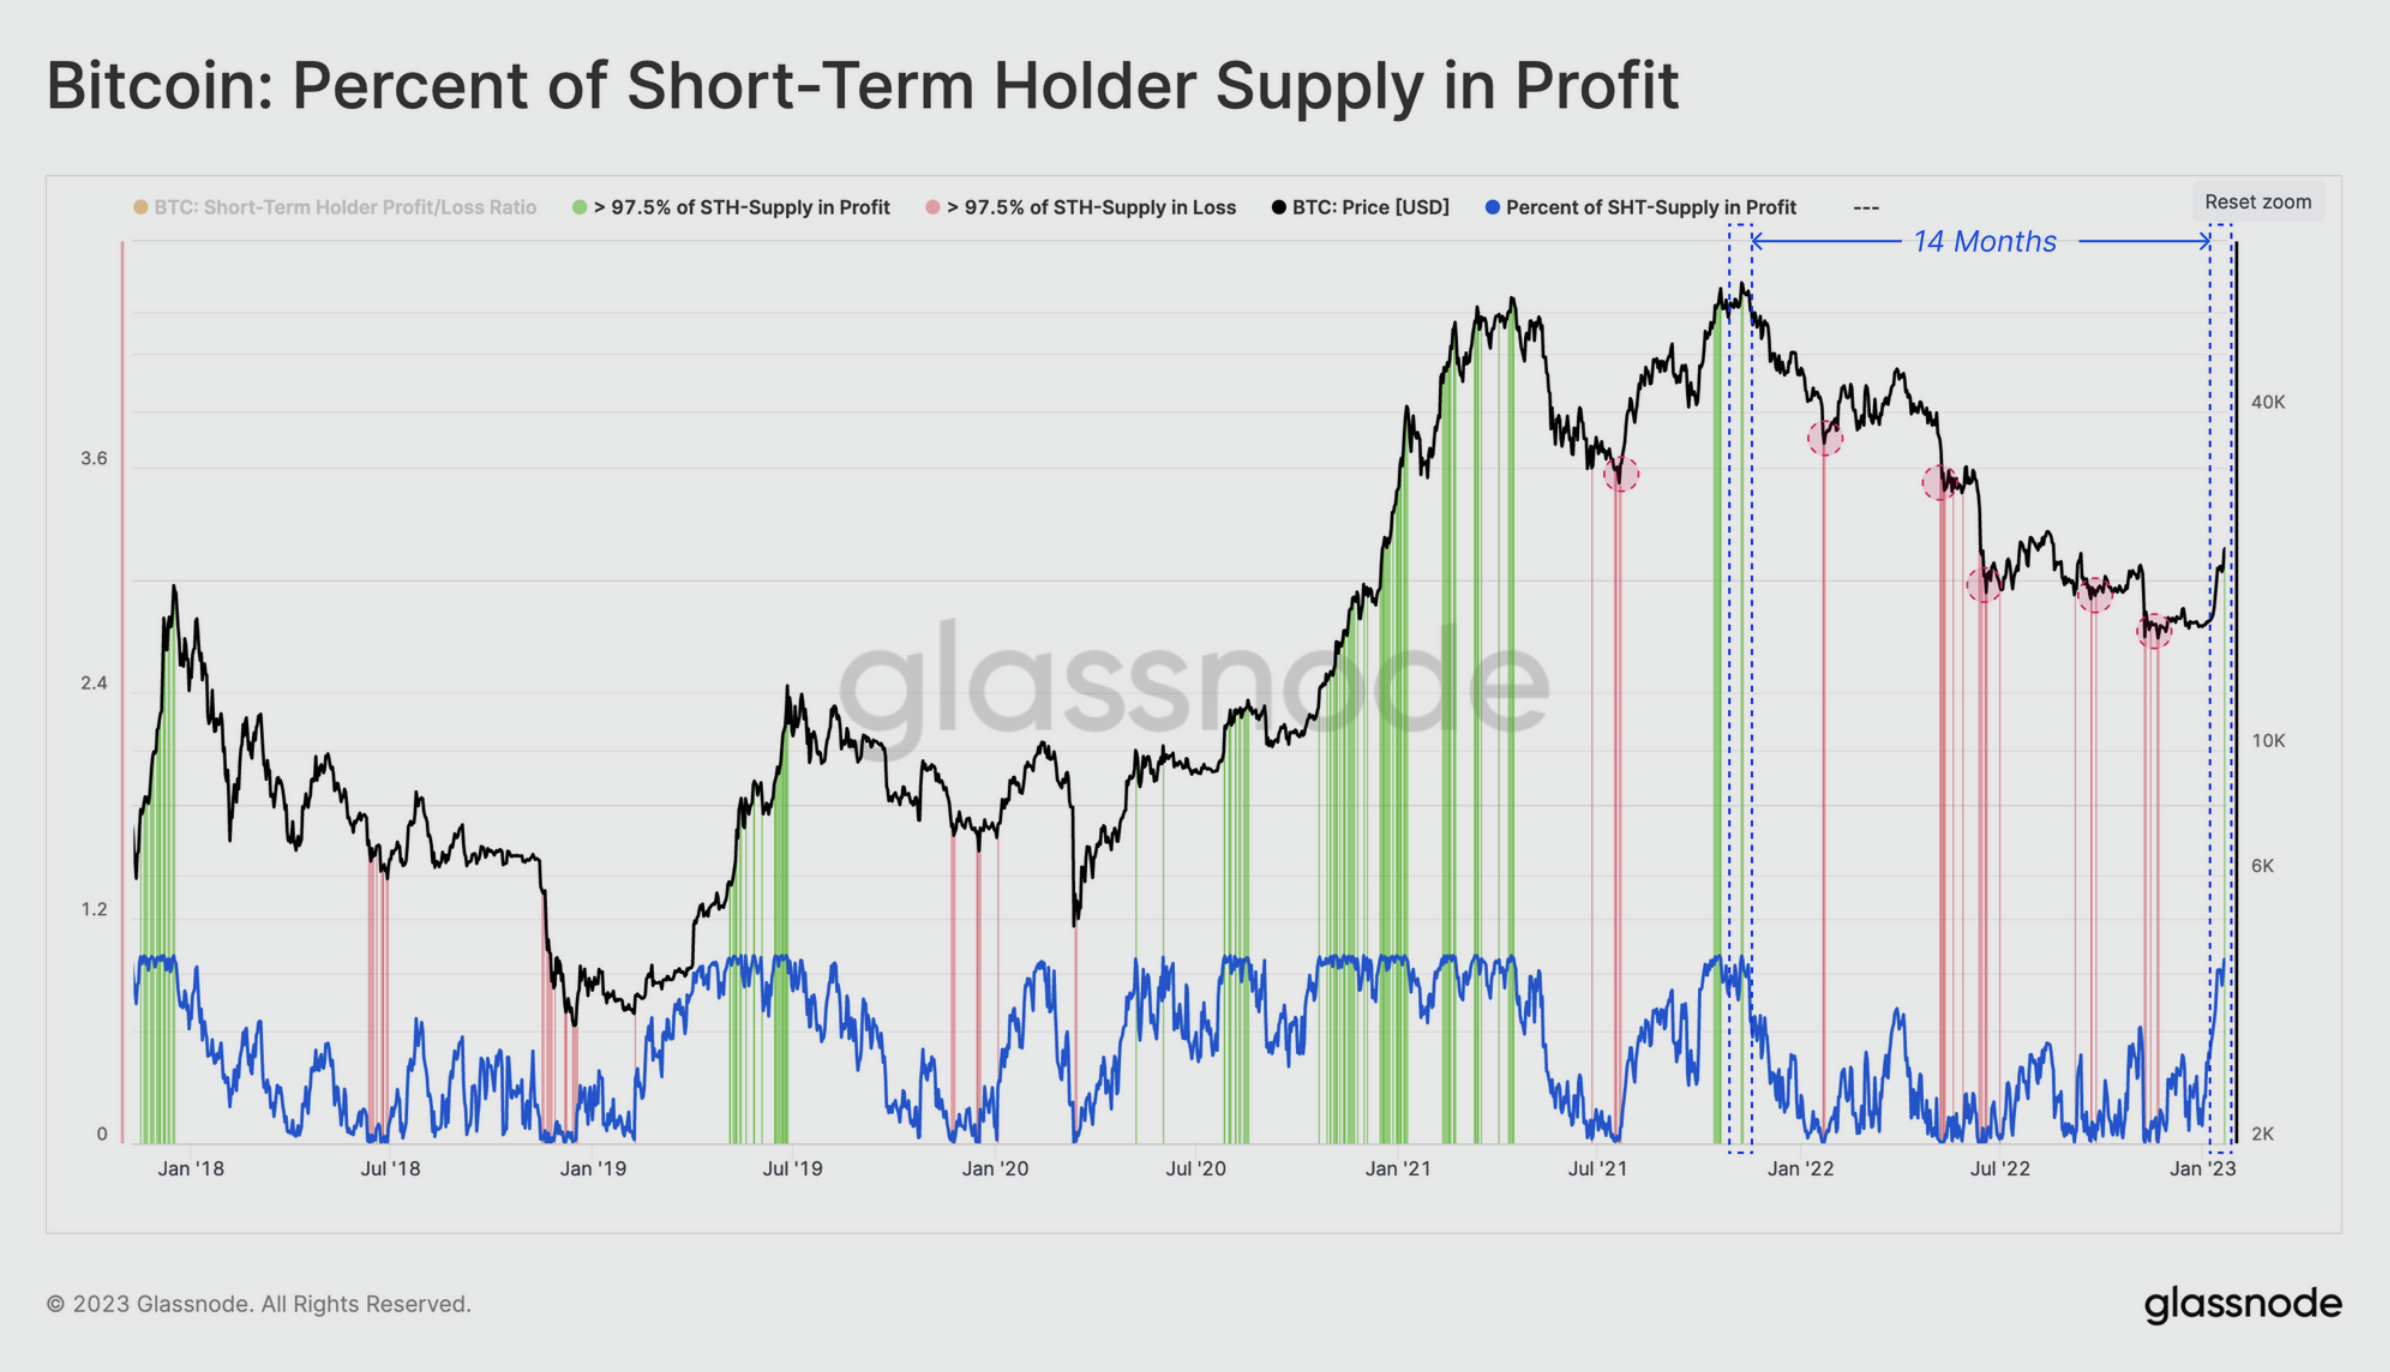 Bitcoin: Percent of short-term holder supply in profit